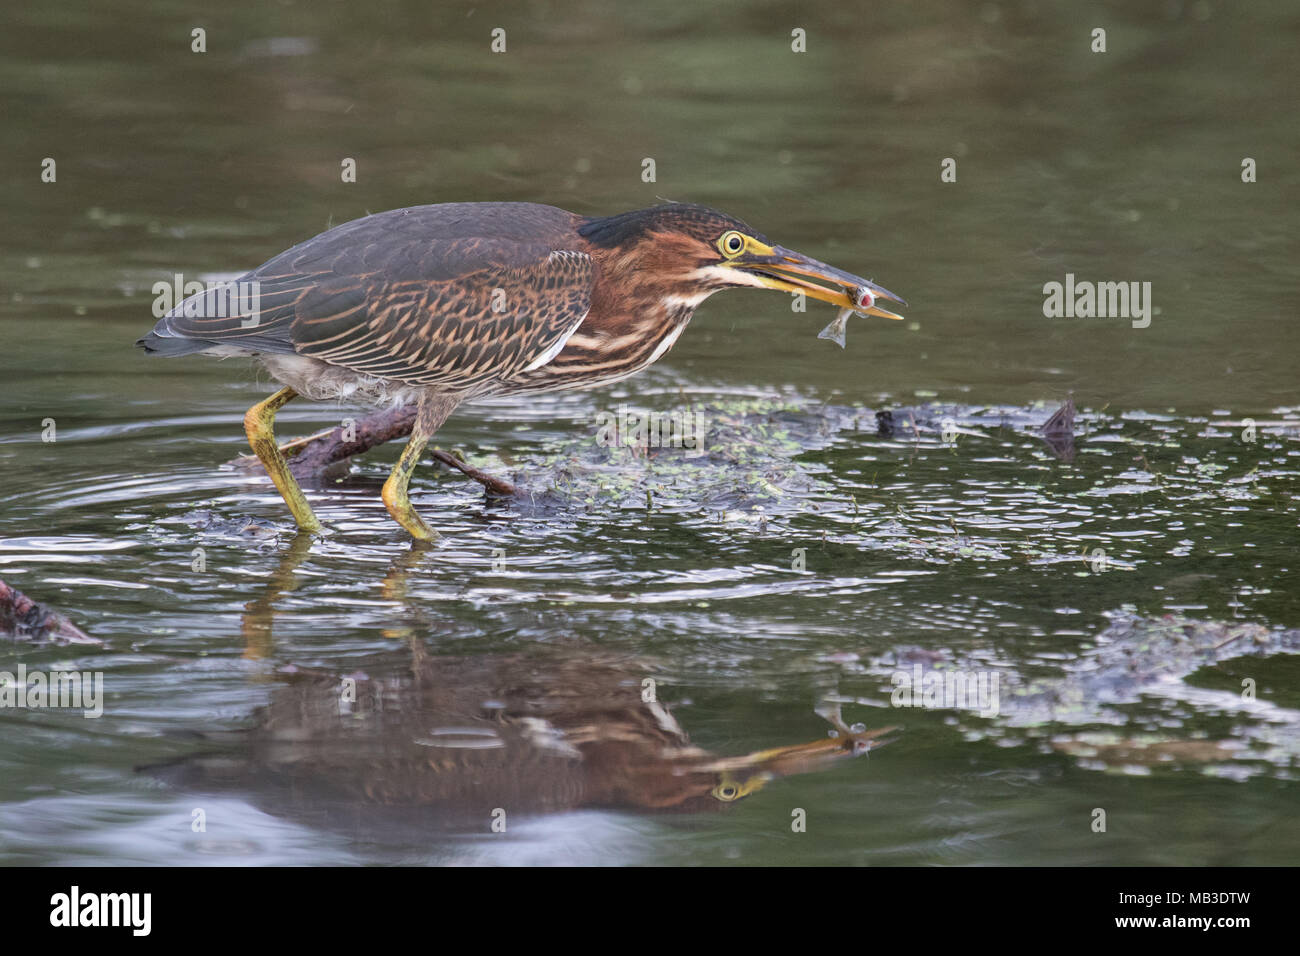 An adult green heron after snaring a minnow from Oneida Lake, New York, USA. Stock Photo